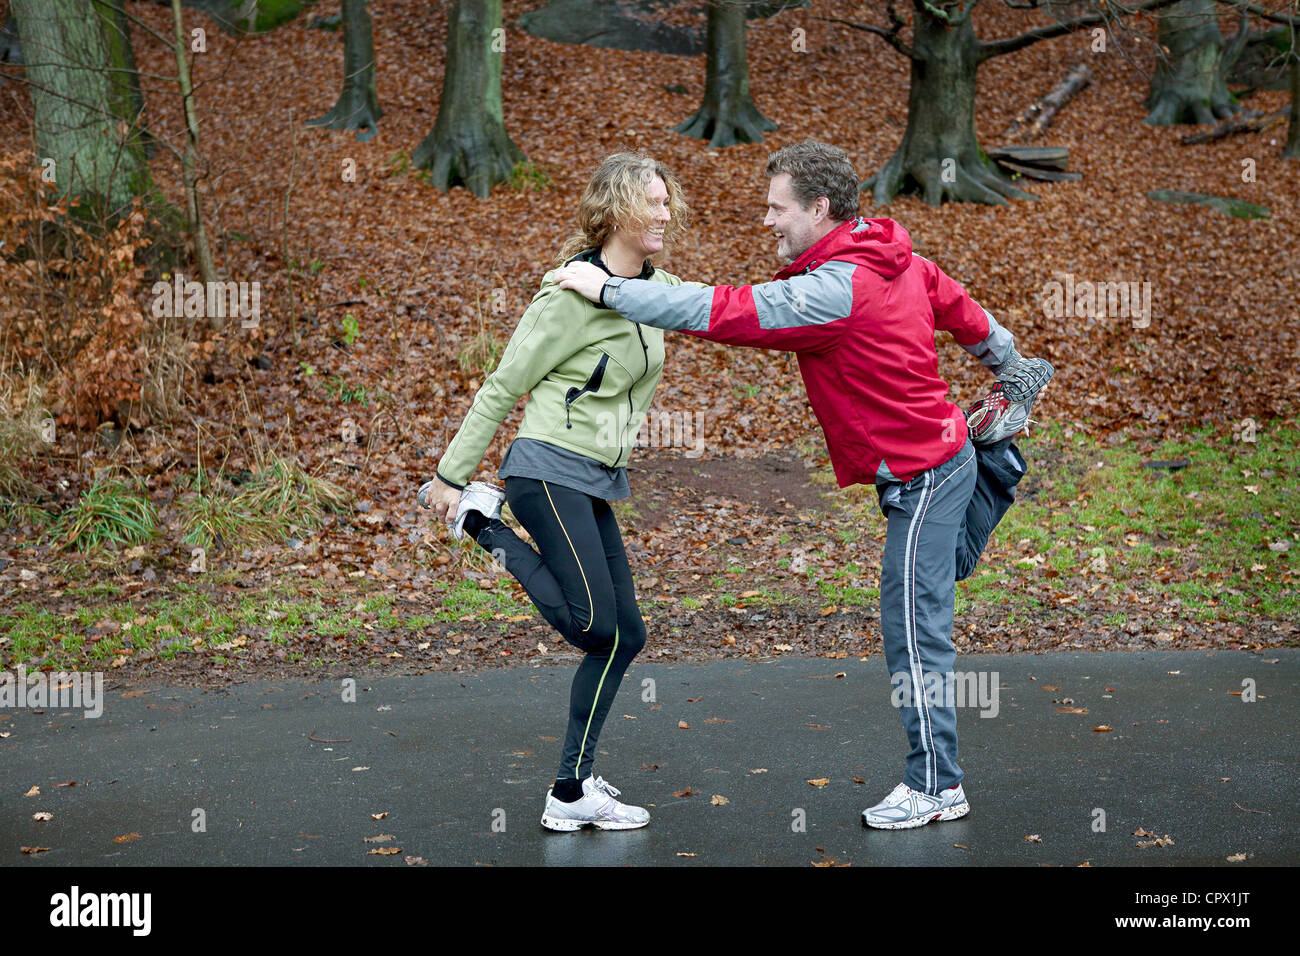 Mature couple leaning together to perform warming up exercises Stock Photo